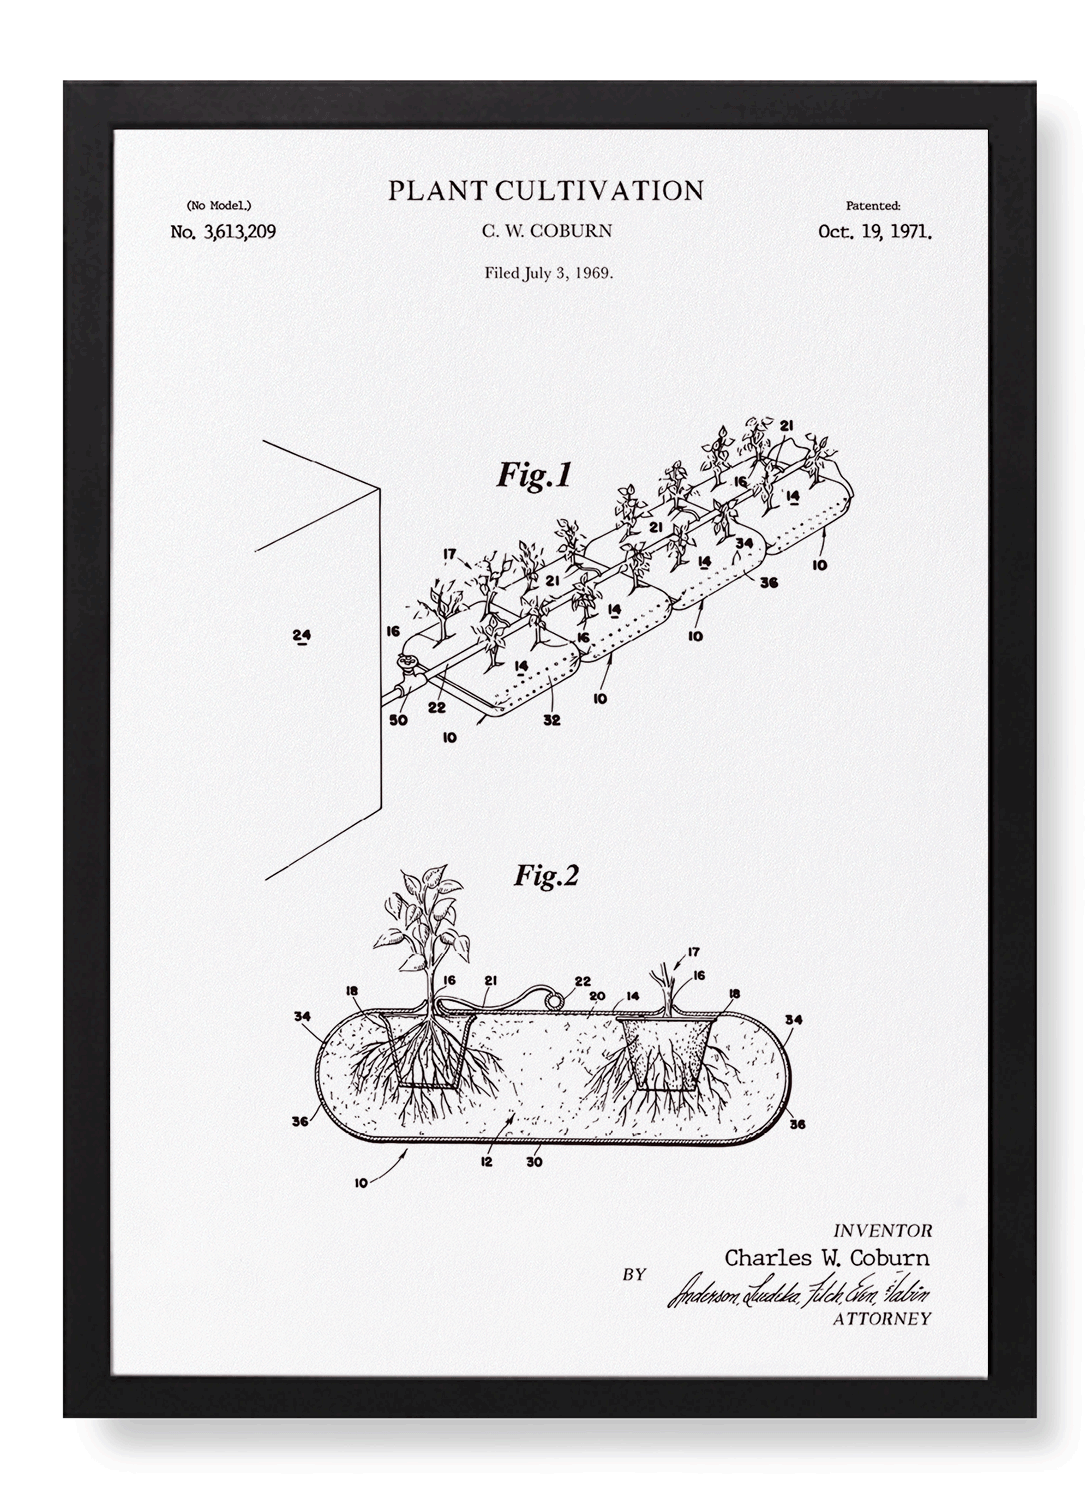 PATENT OF PLANT CULTIVATION (1971)